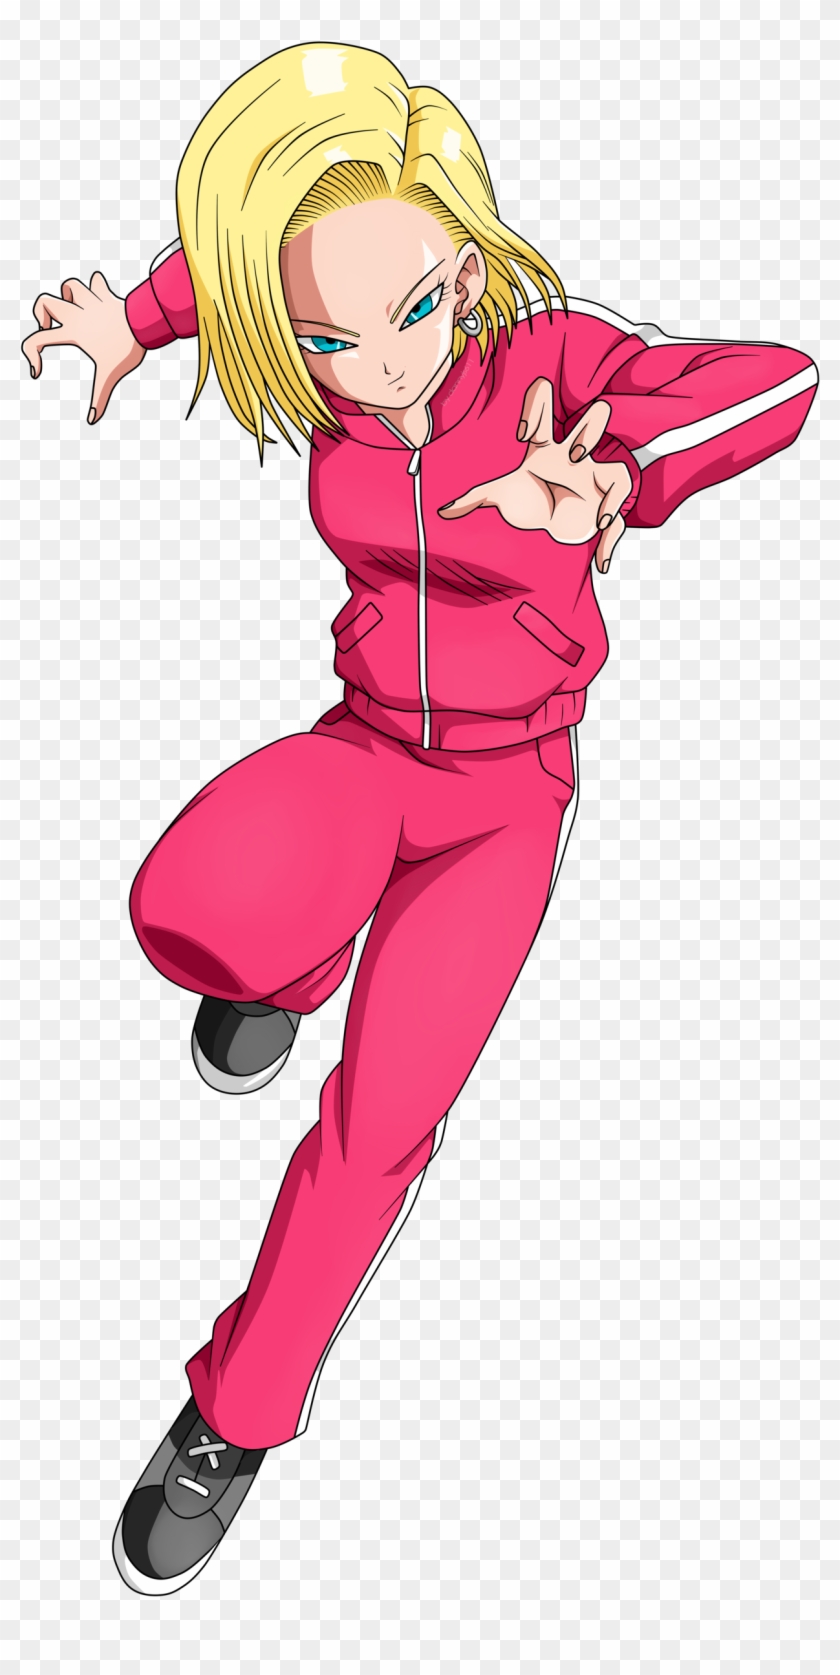 Android 18 Png - Dragon Ball Super Androide 18 Clipart #522054